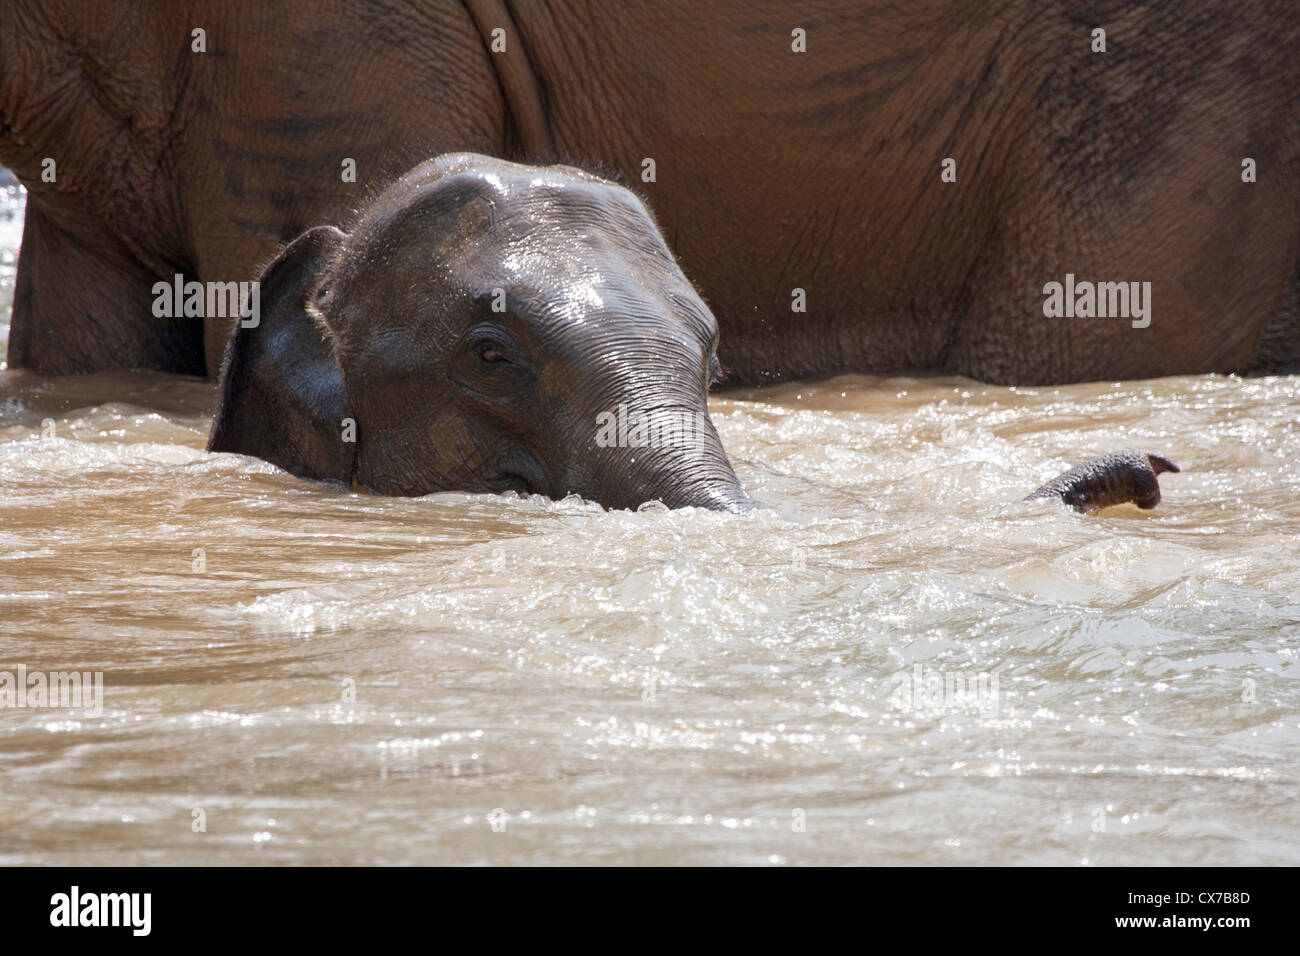 Elephant calf in water next to parent Stock Photo